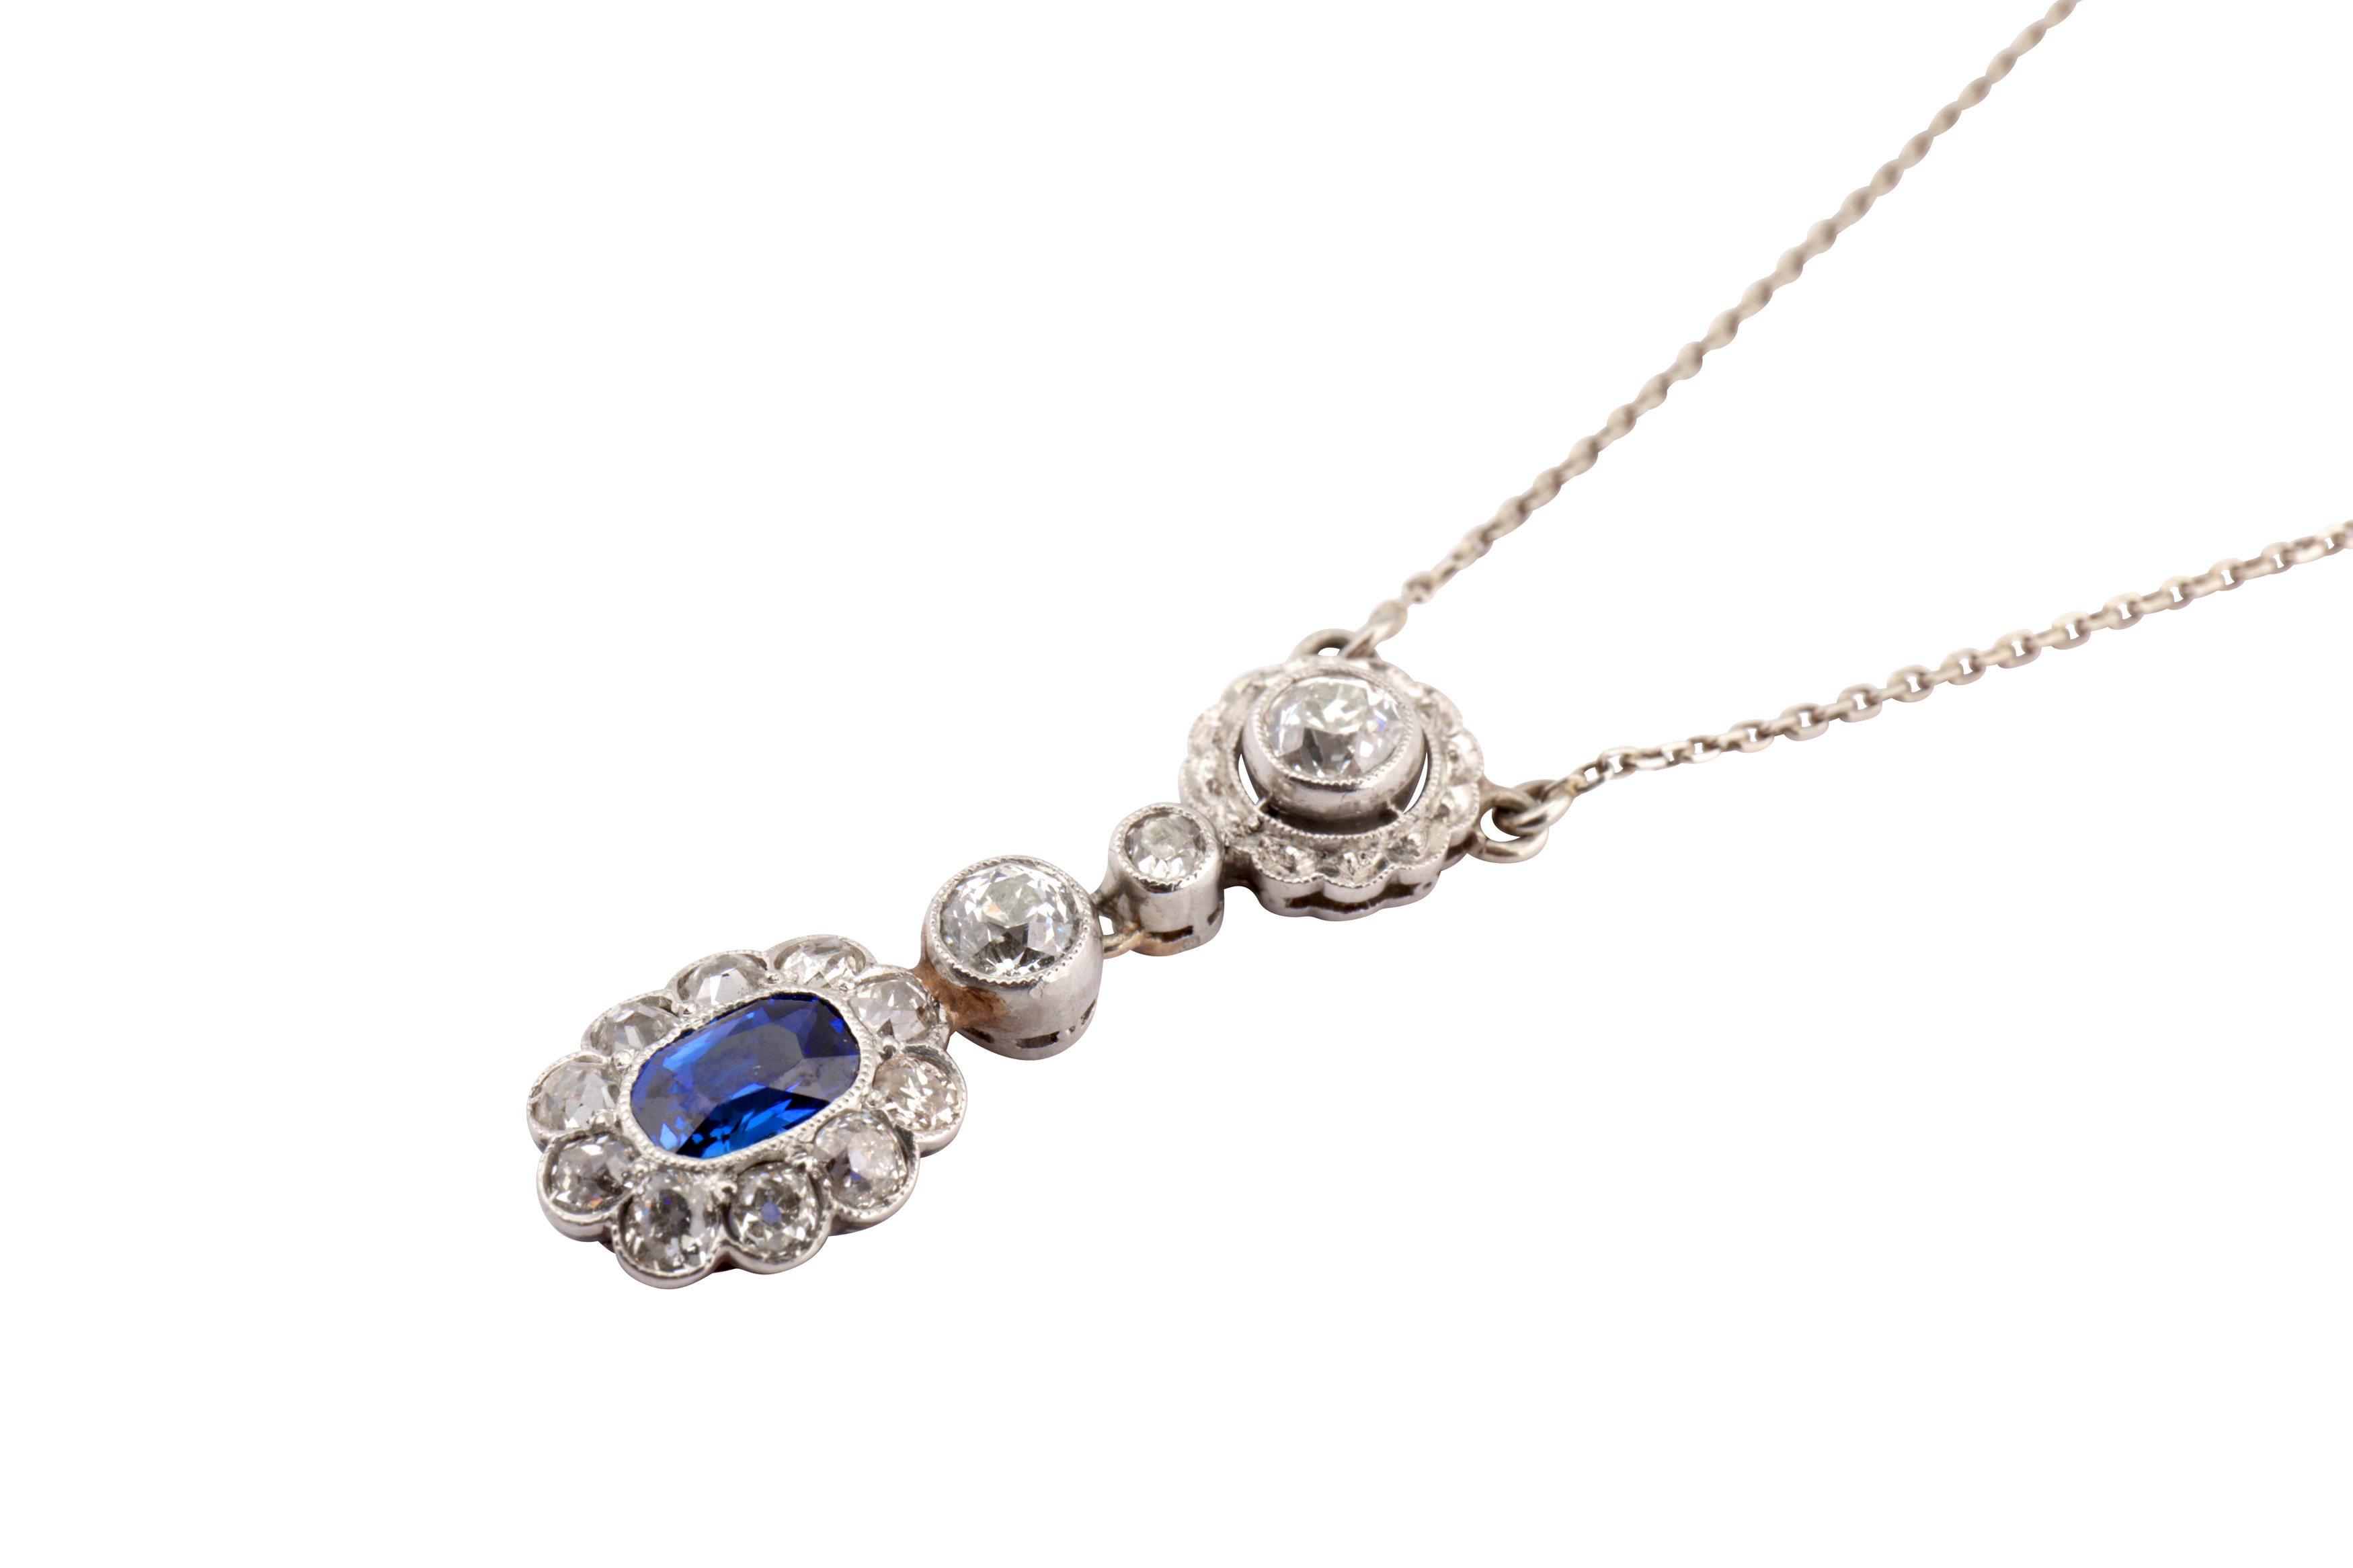 An early 20th century sapphire and diamond pendant necklace - Image 2 of 3